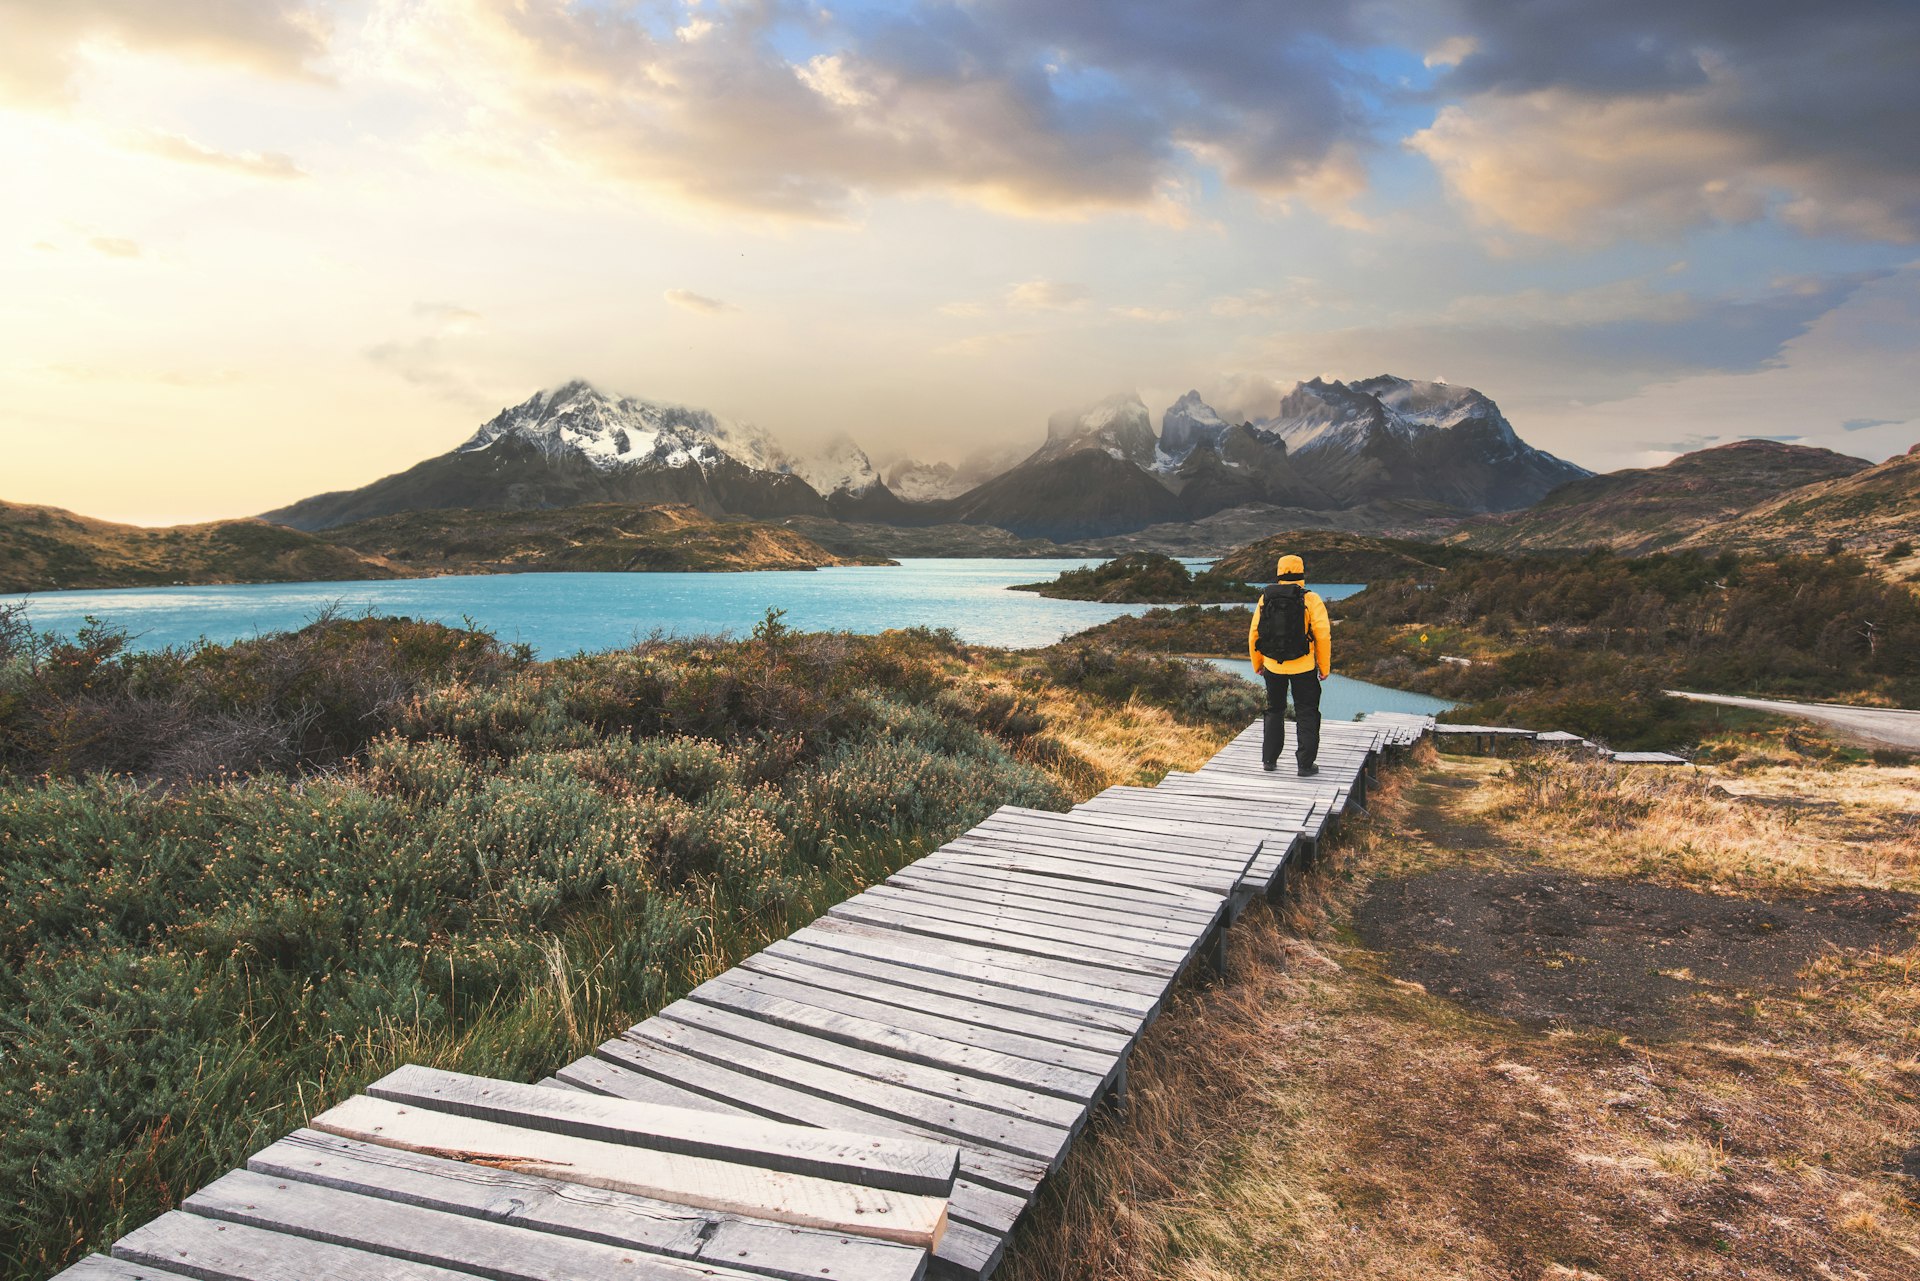 A hiker on a wooden walkway in Torres del Paine National Park, Patagonia, Chile